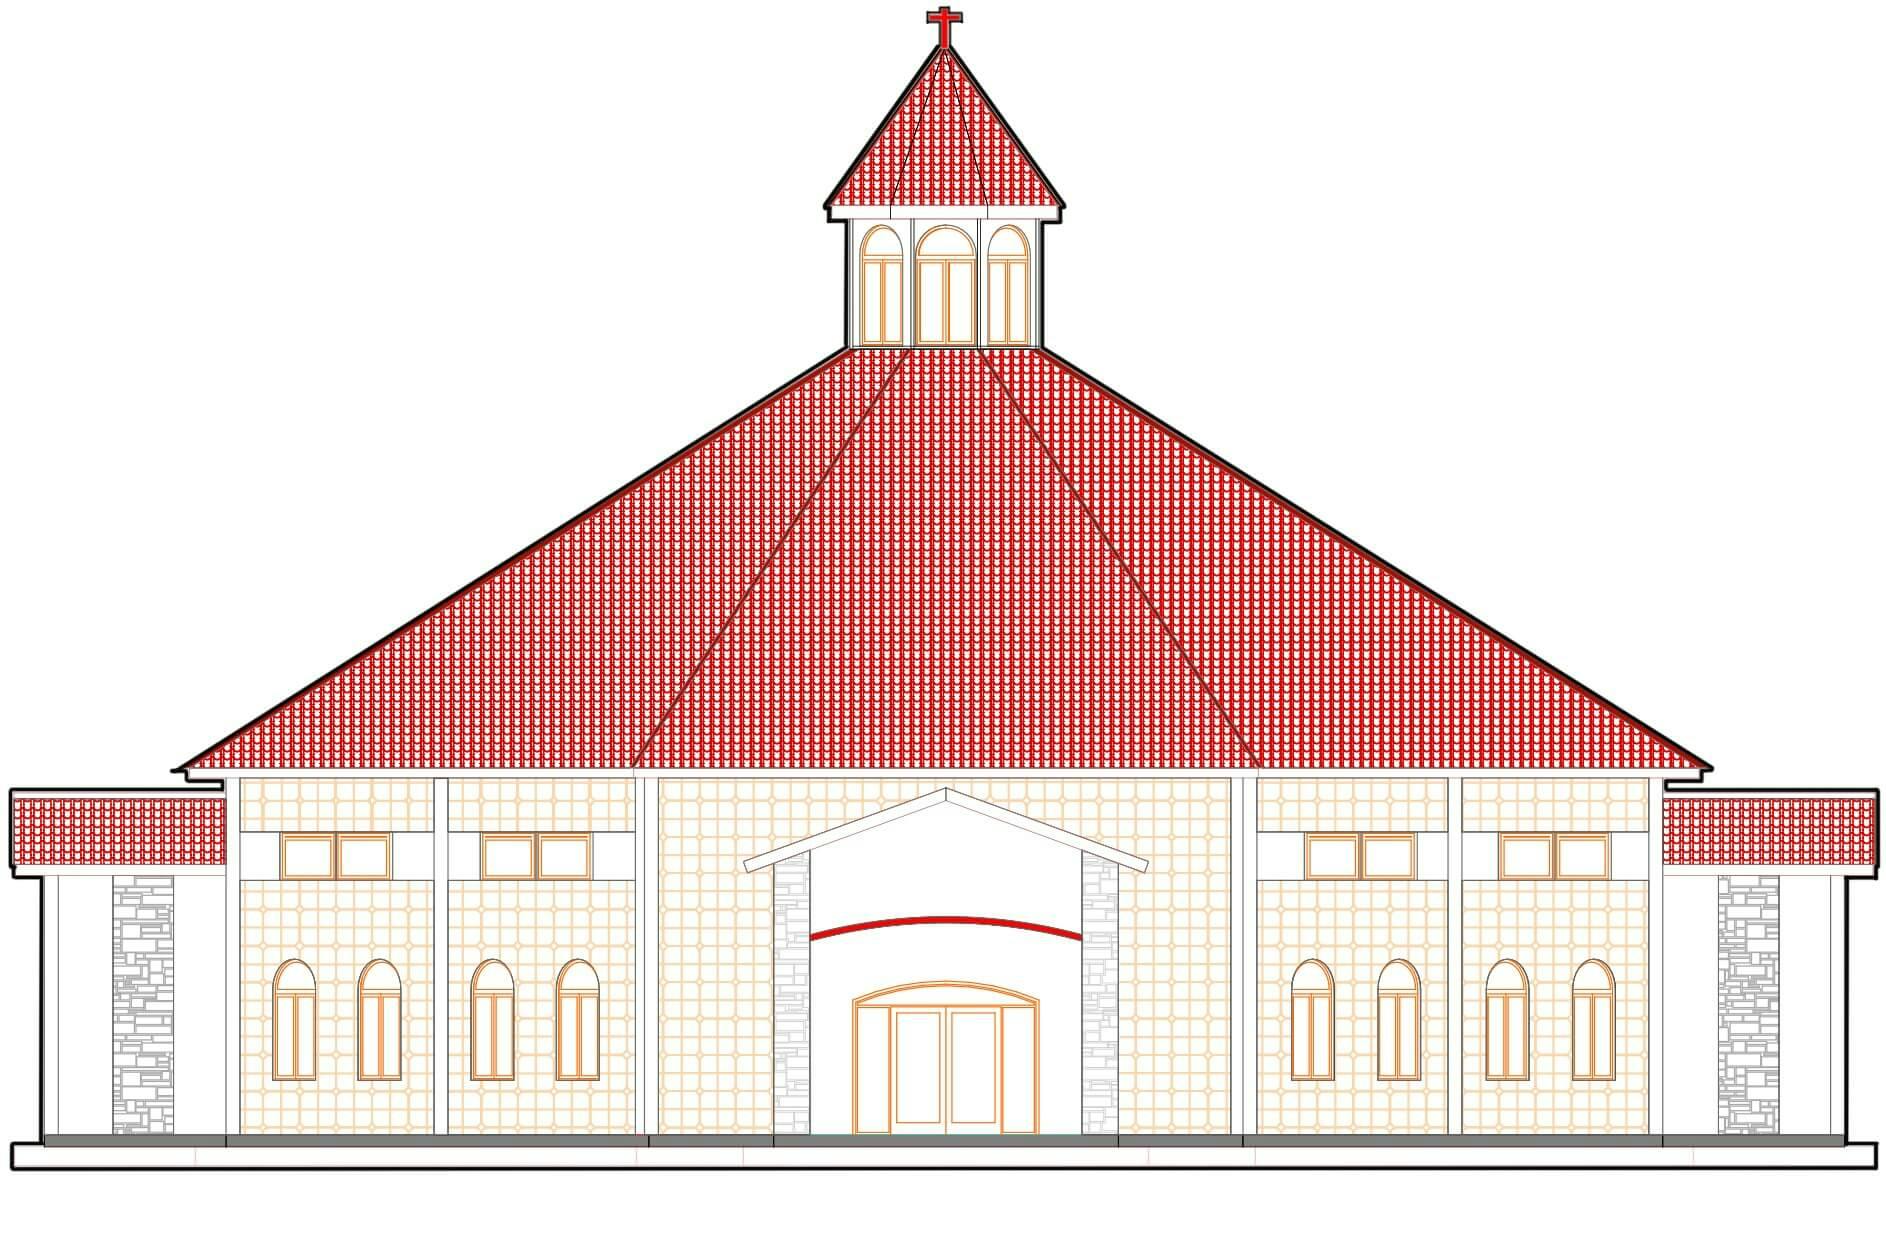 Introducing: St. Francis of Assisi Chapel 